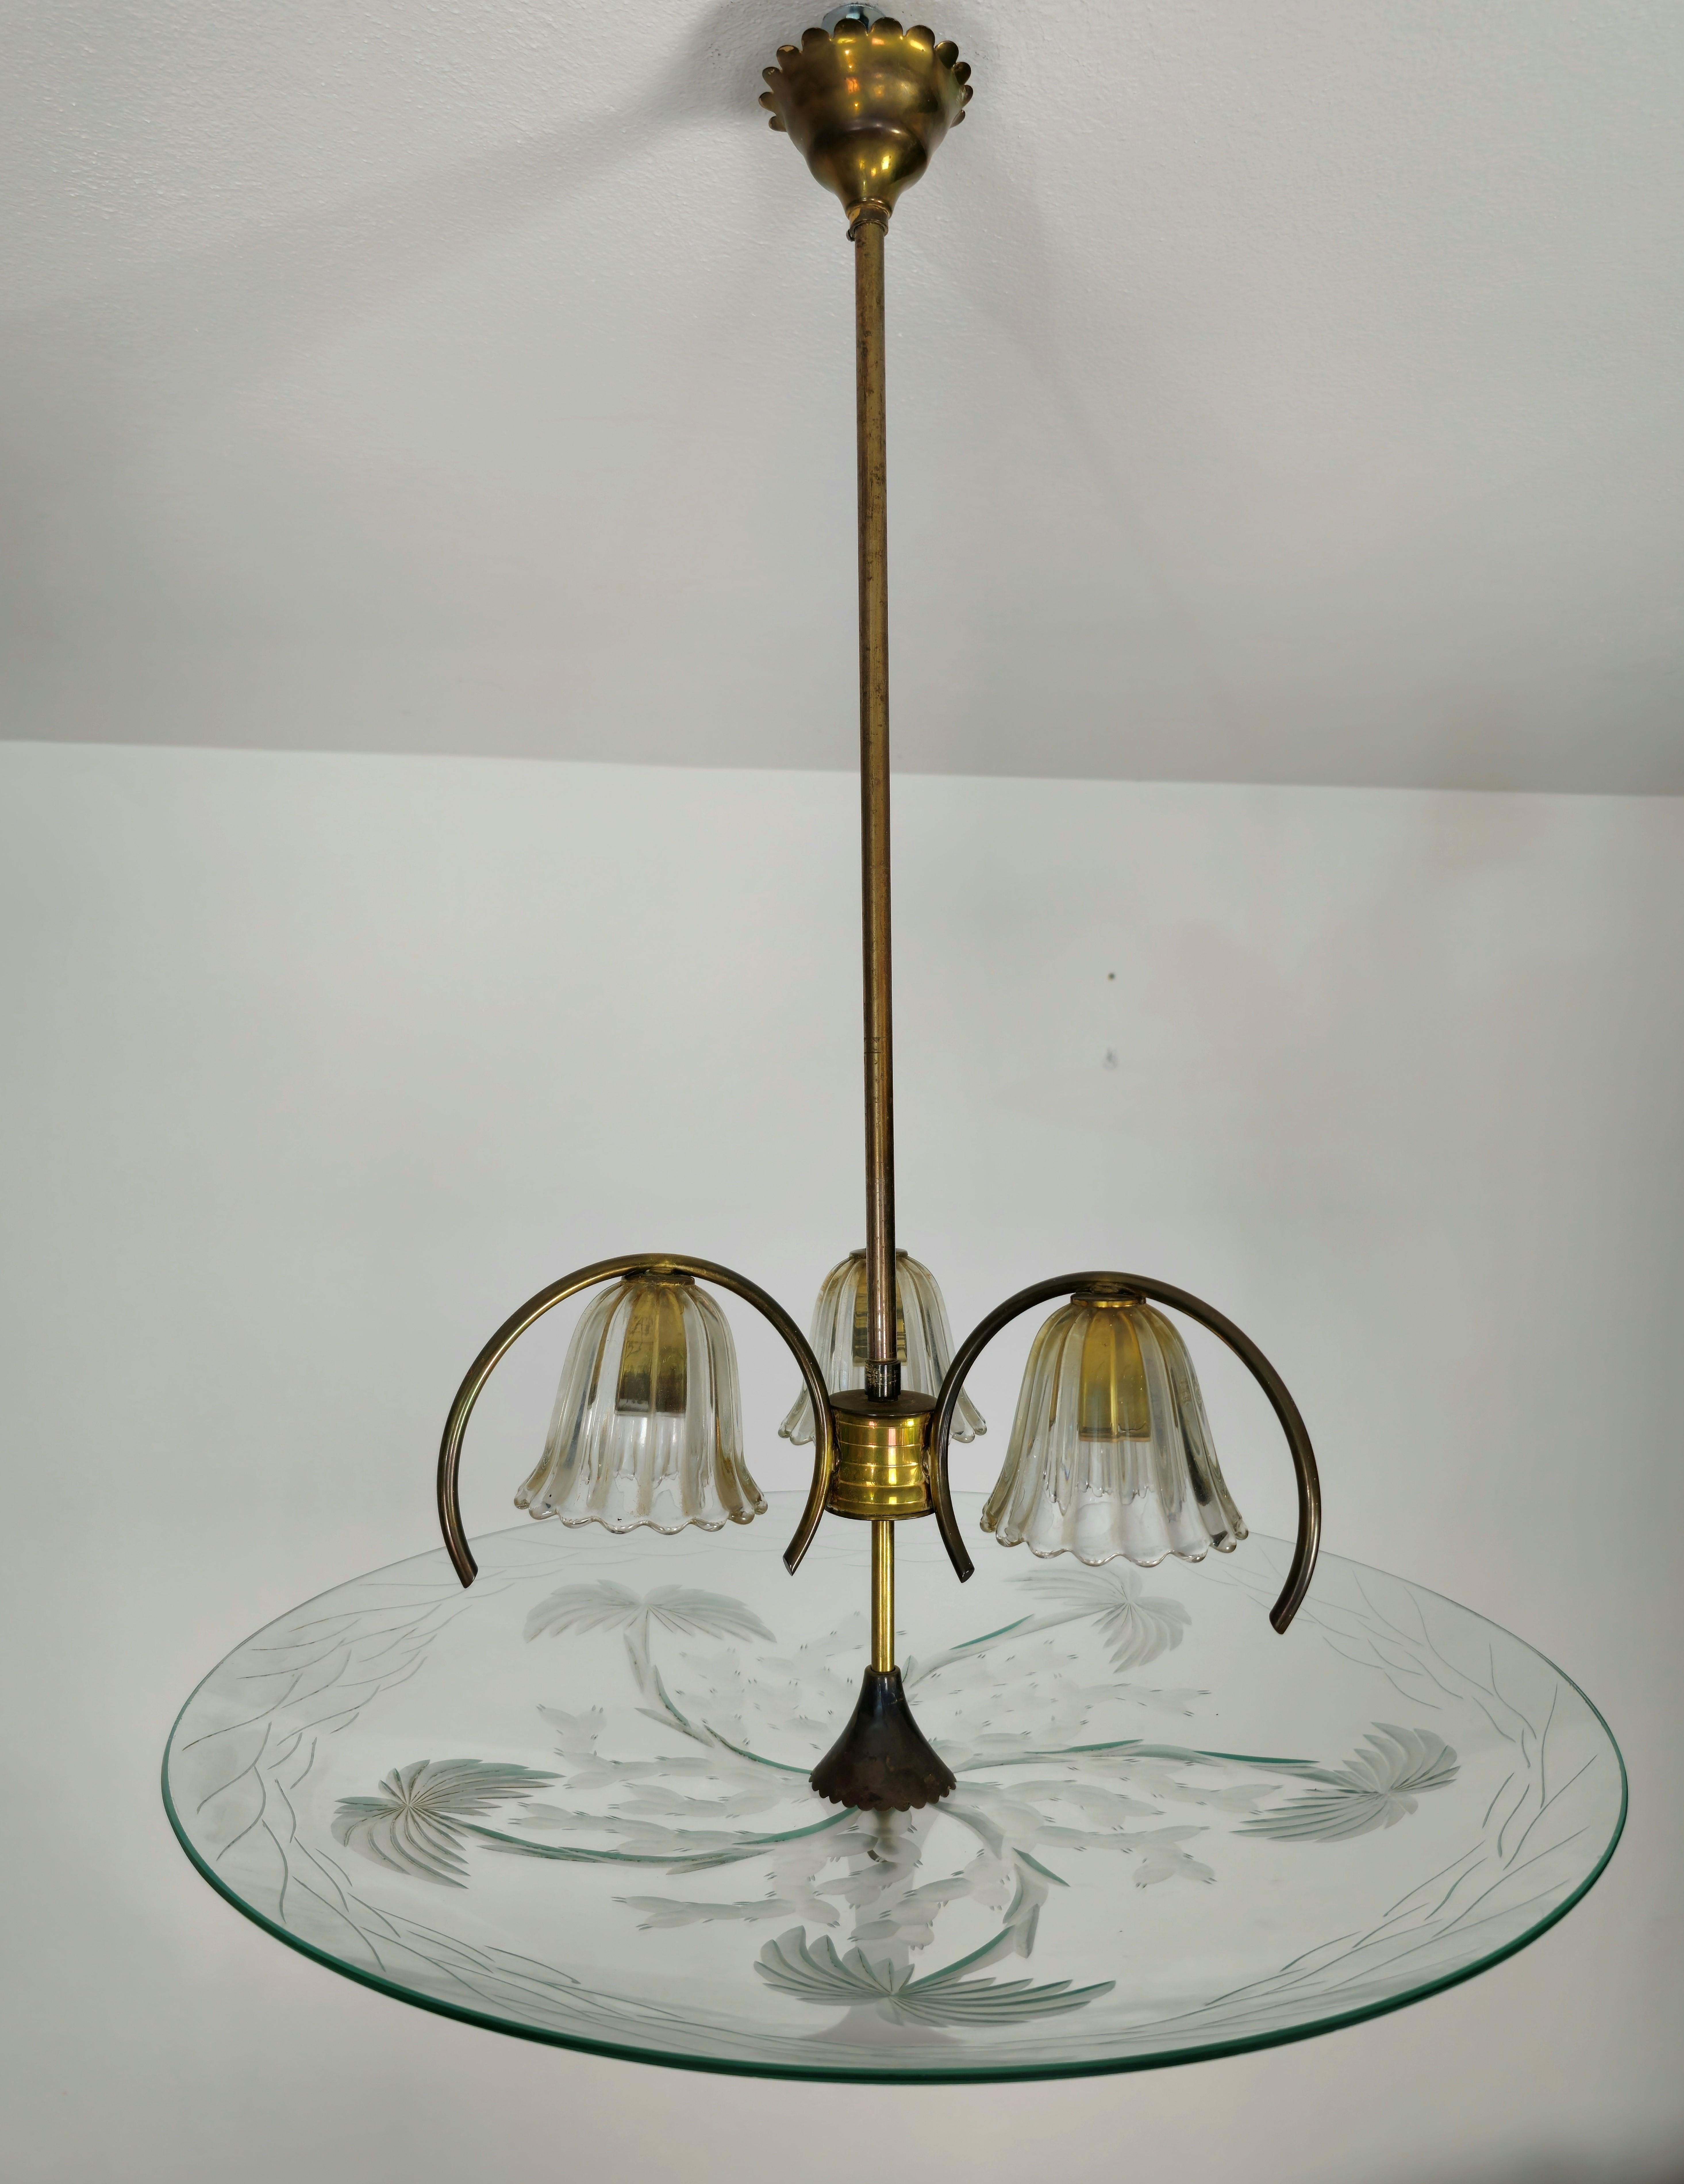 Chandelier Pendant Brass Glass Attributed to Pietro Chiesa for Fontana Arte 1940 For Sale 3